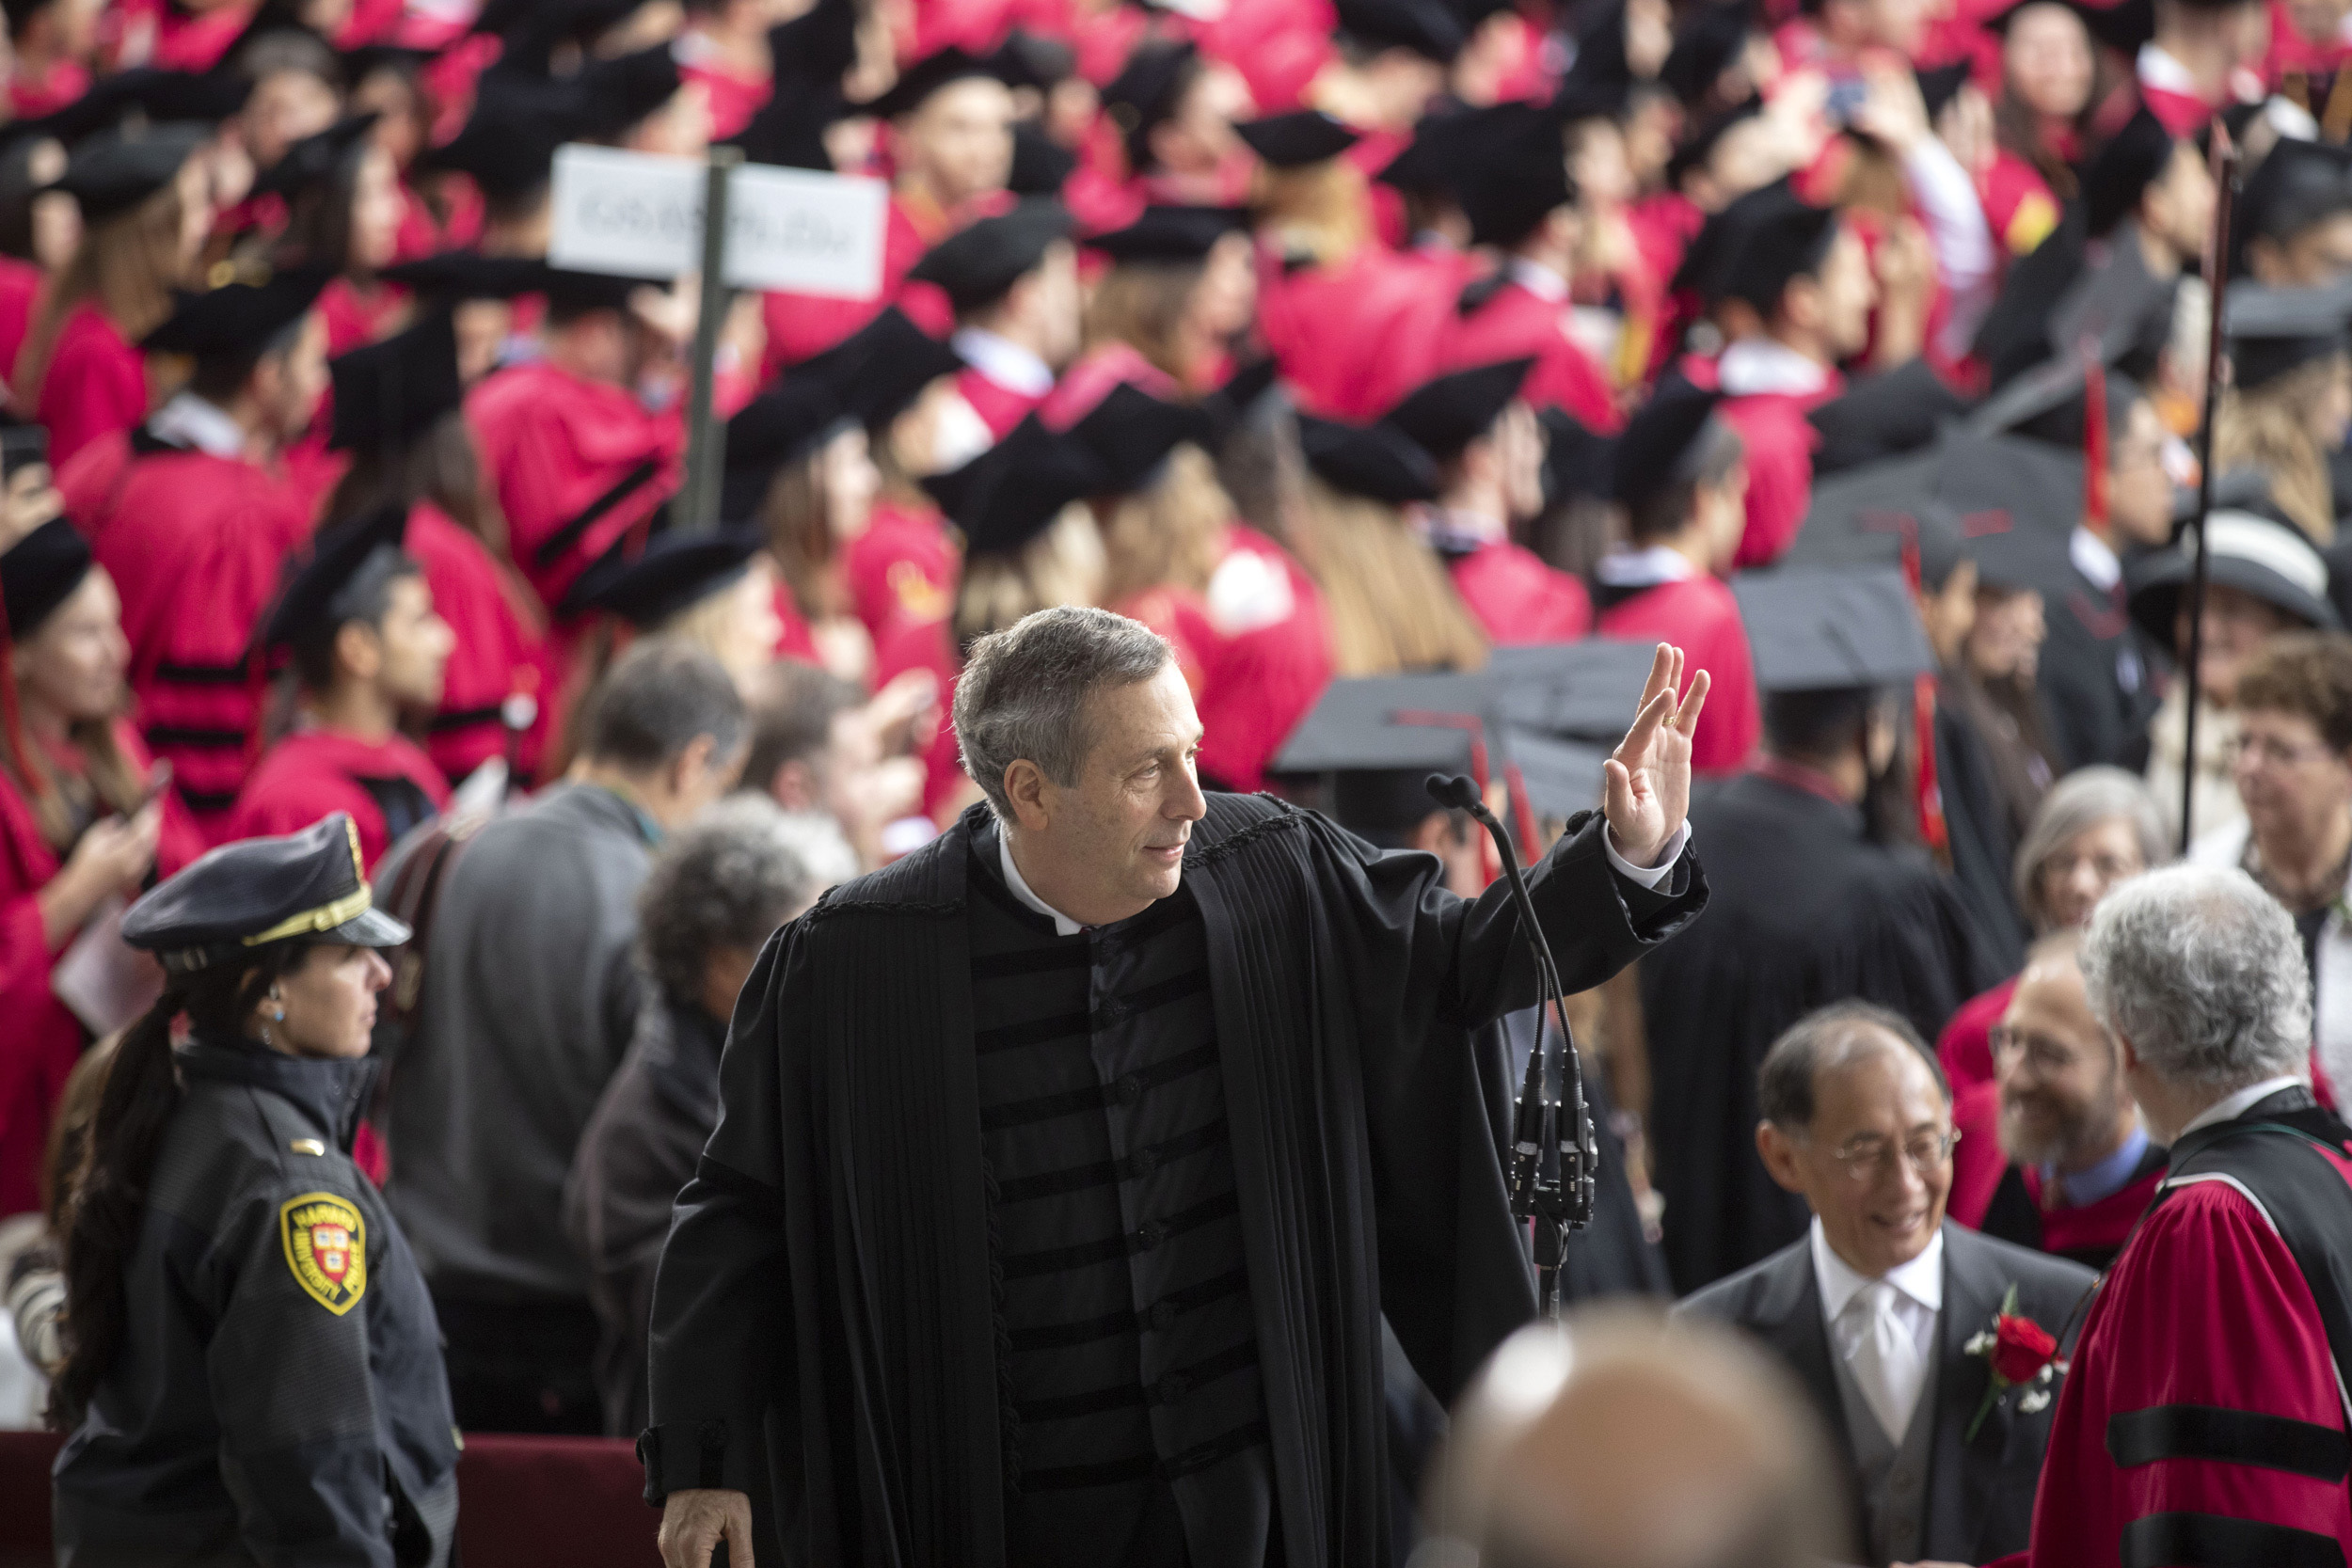 Harvard President Larry Bacow at 2019 Commencement.